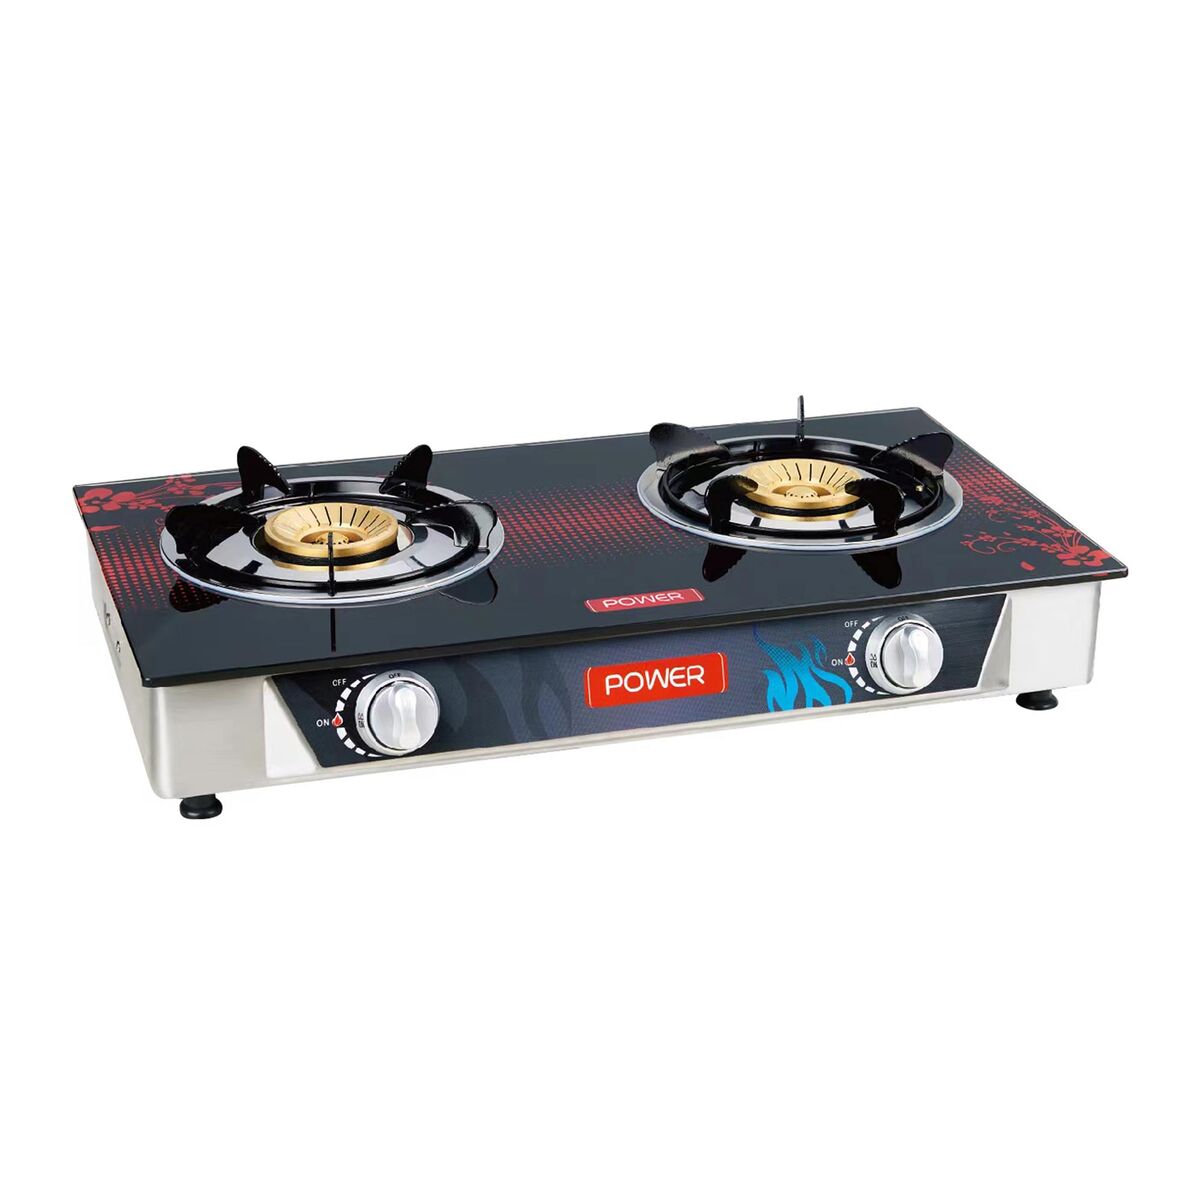 Power 2 Burner Counter Top Gas Table PGSG92GT